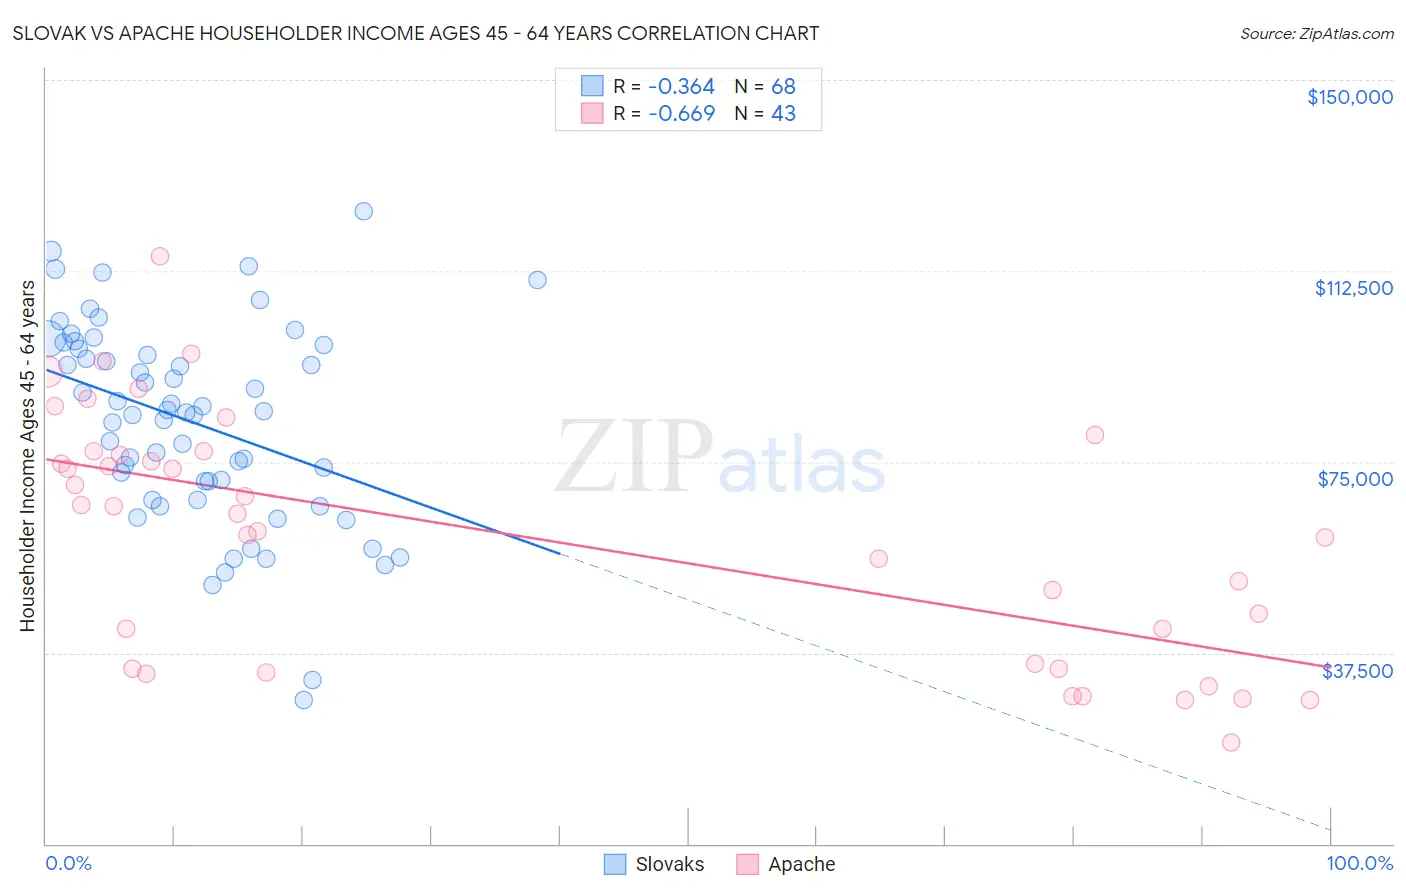 Slovak vs Apache Householder Income Ages 45 - 64 years